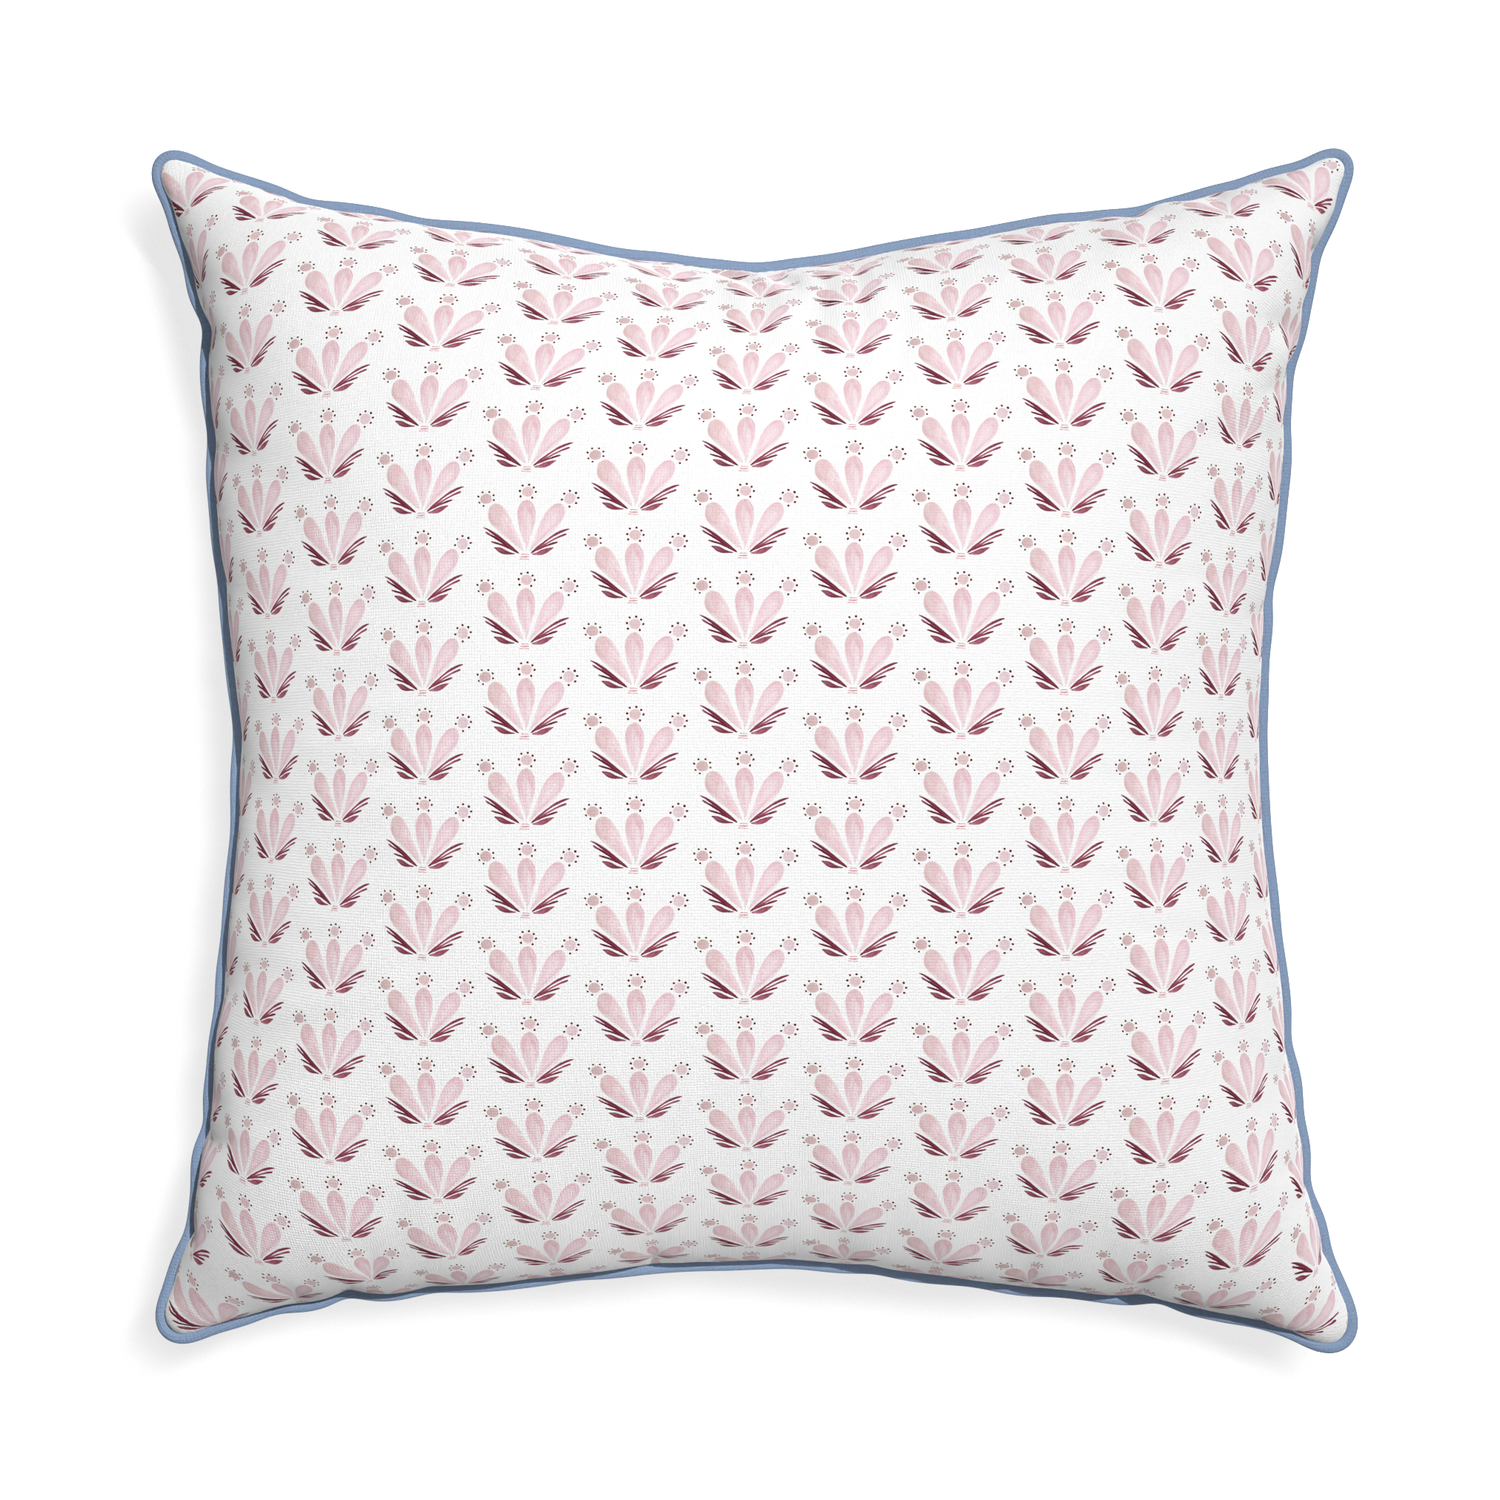 Euro-sham serena pink custom pink & burgundy drop repeat floralpillow with sky piping on white background